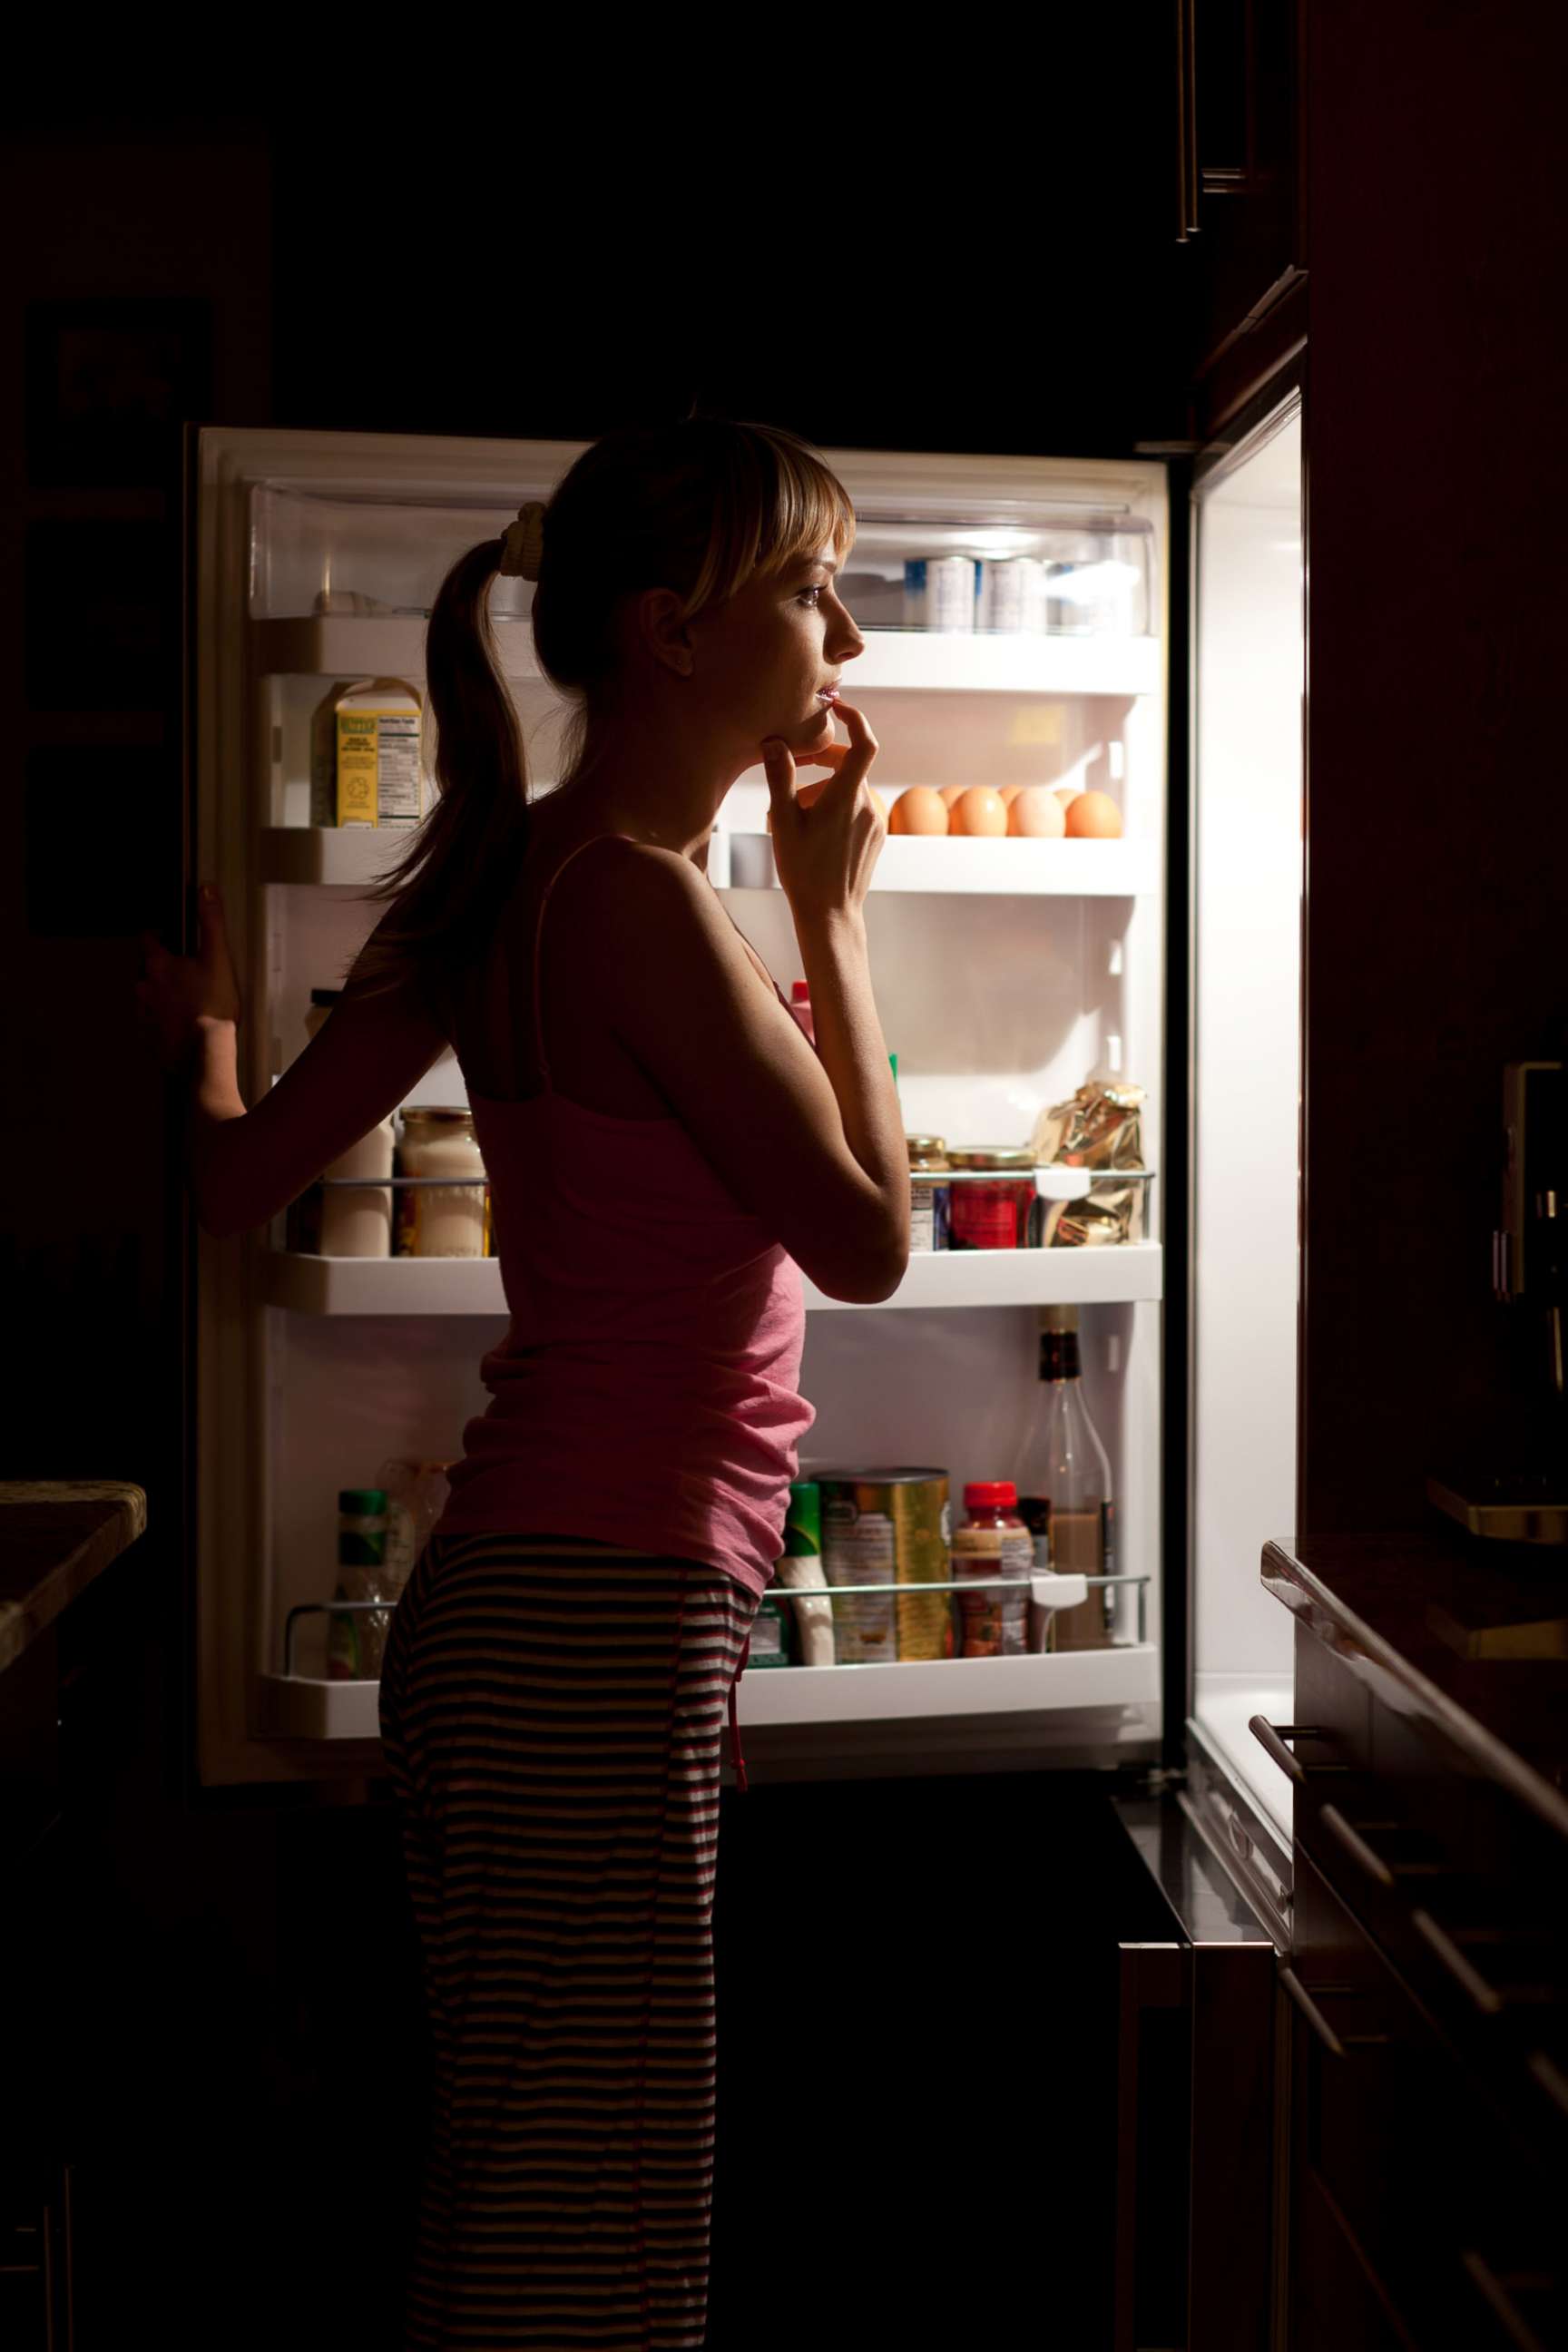 PHOTO: A woman is seen looking at food at night in this undated stock photo.